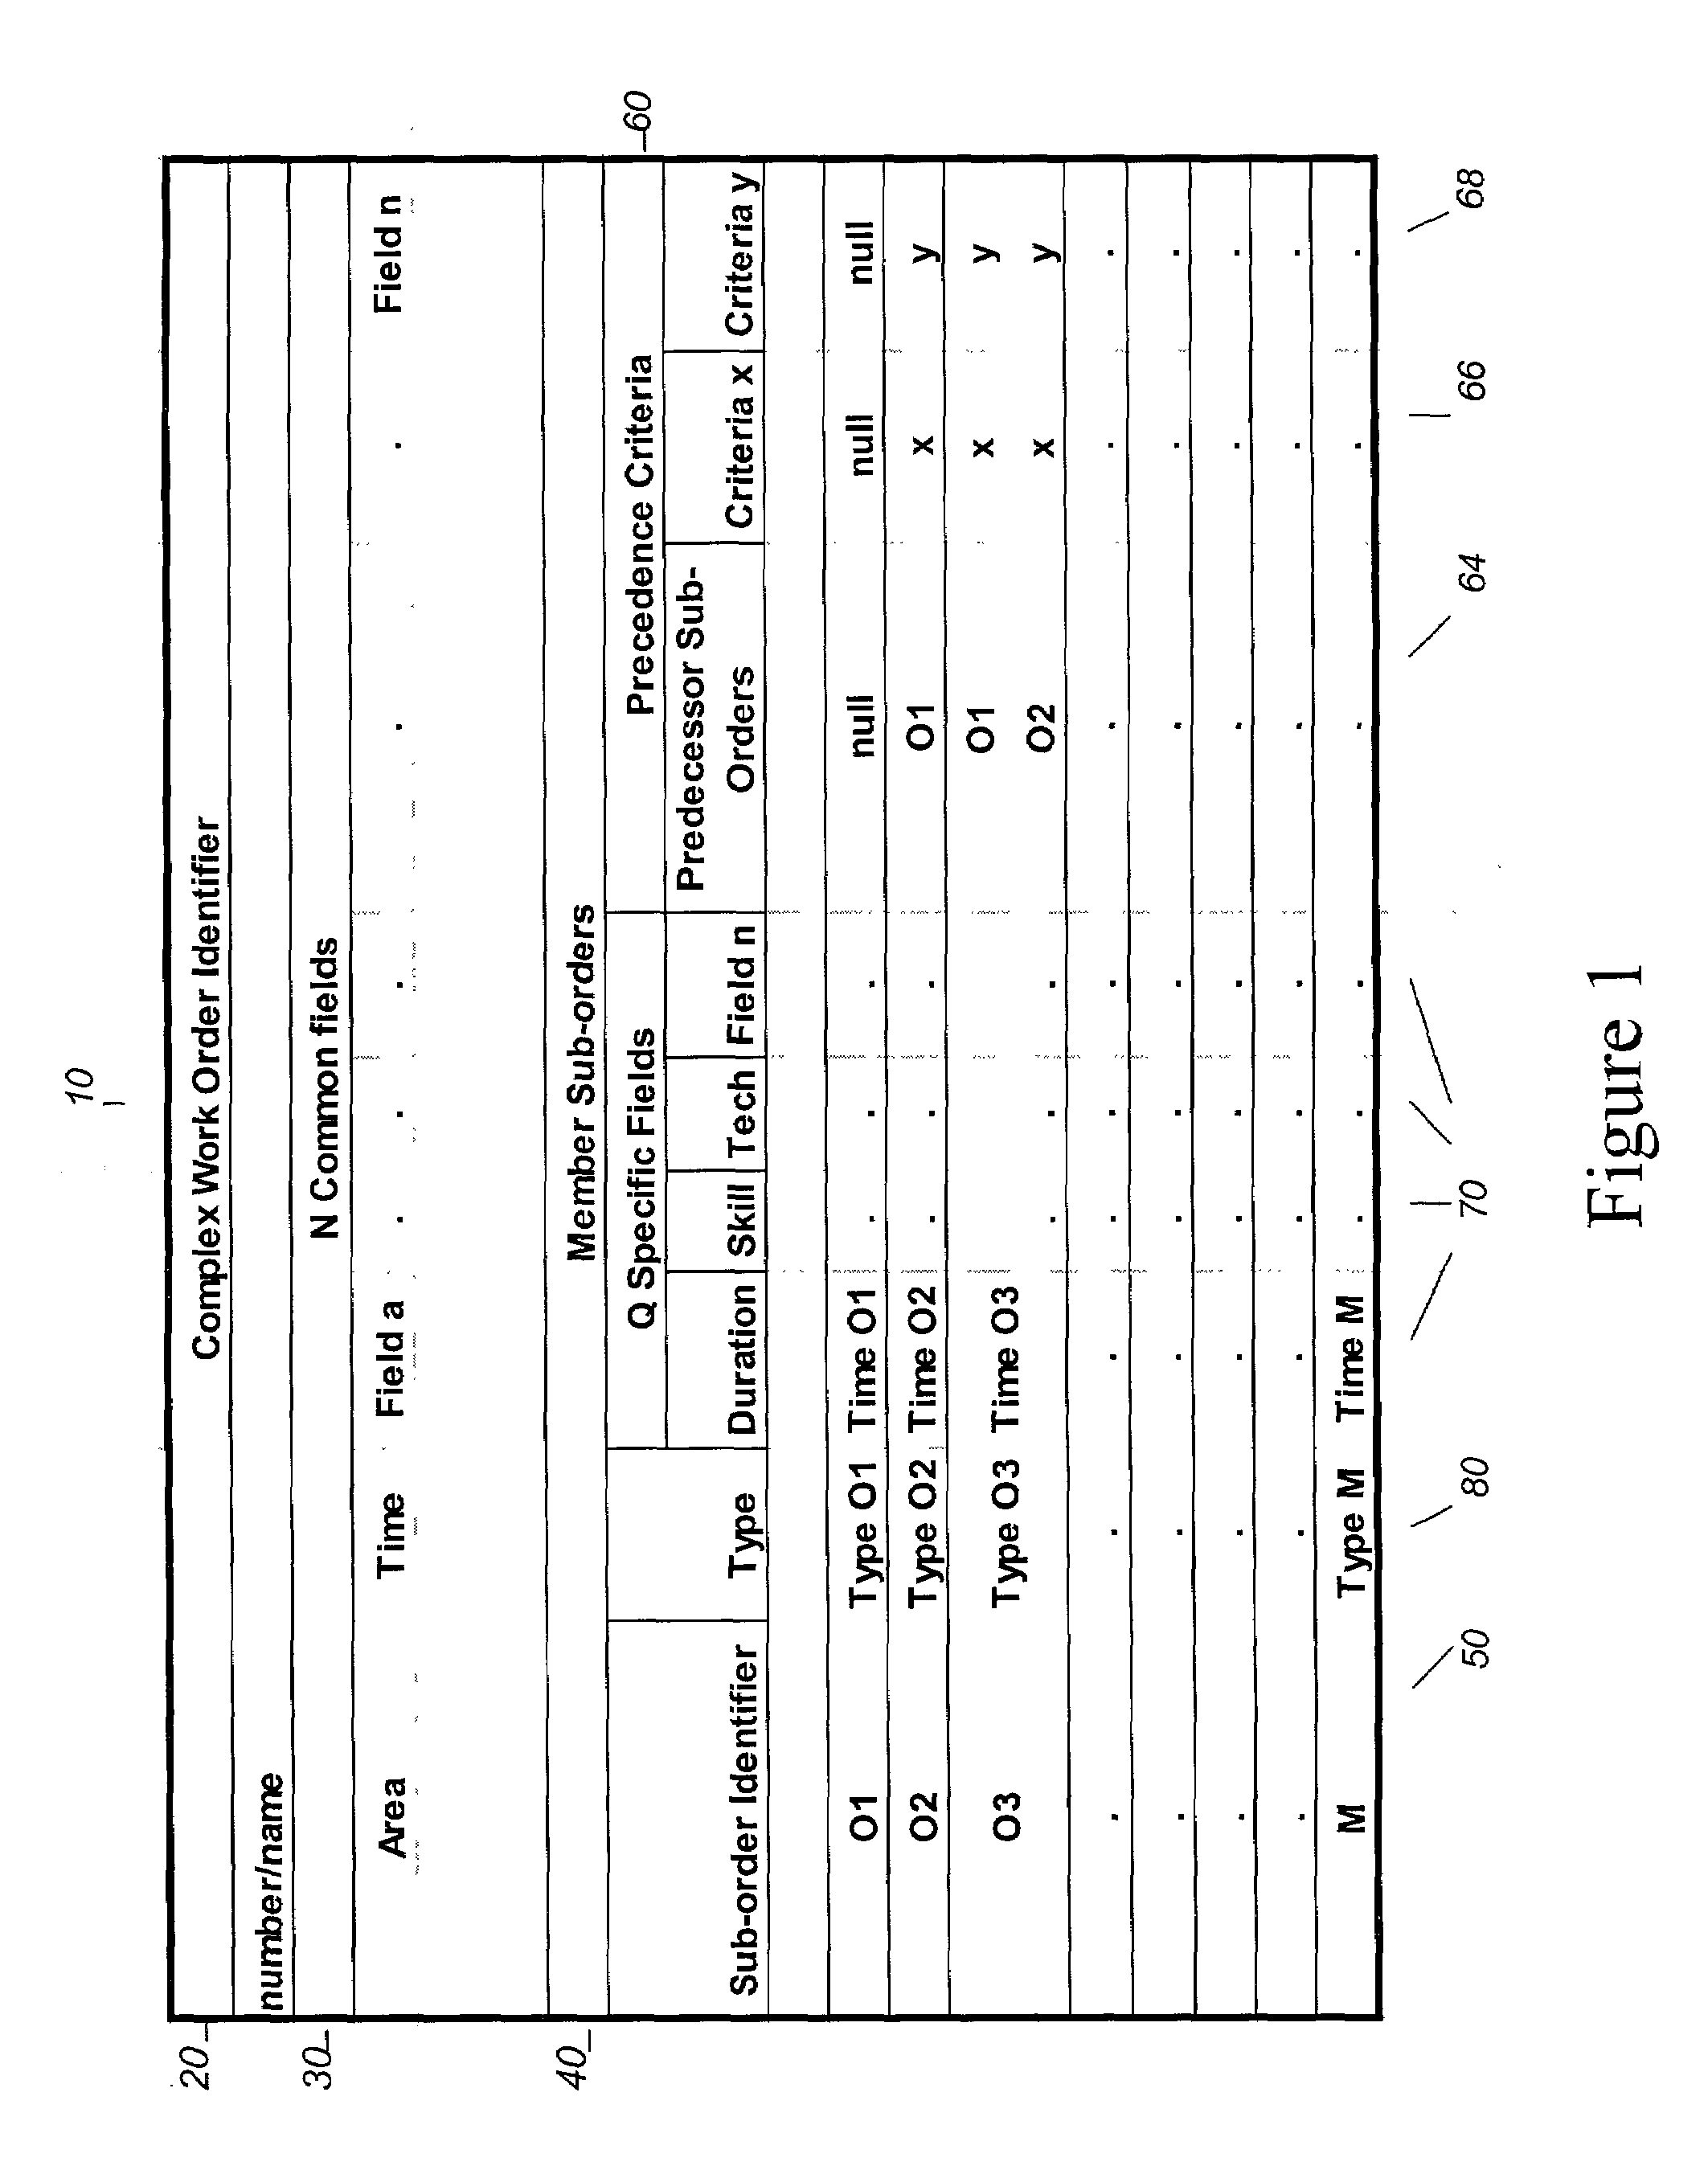 Methods and systems for scheduling complex work orders for a workforce of mobile service technicians